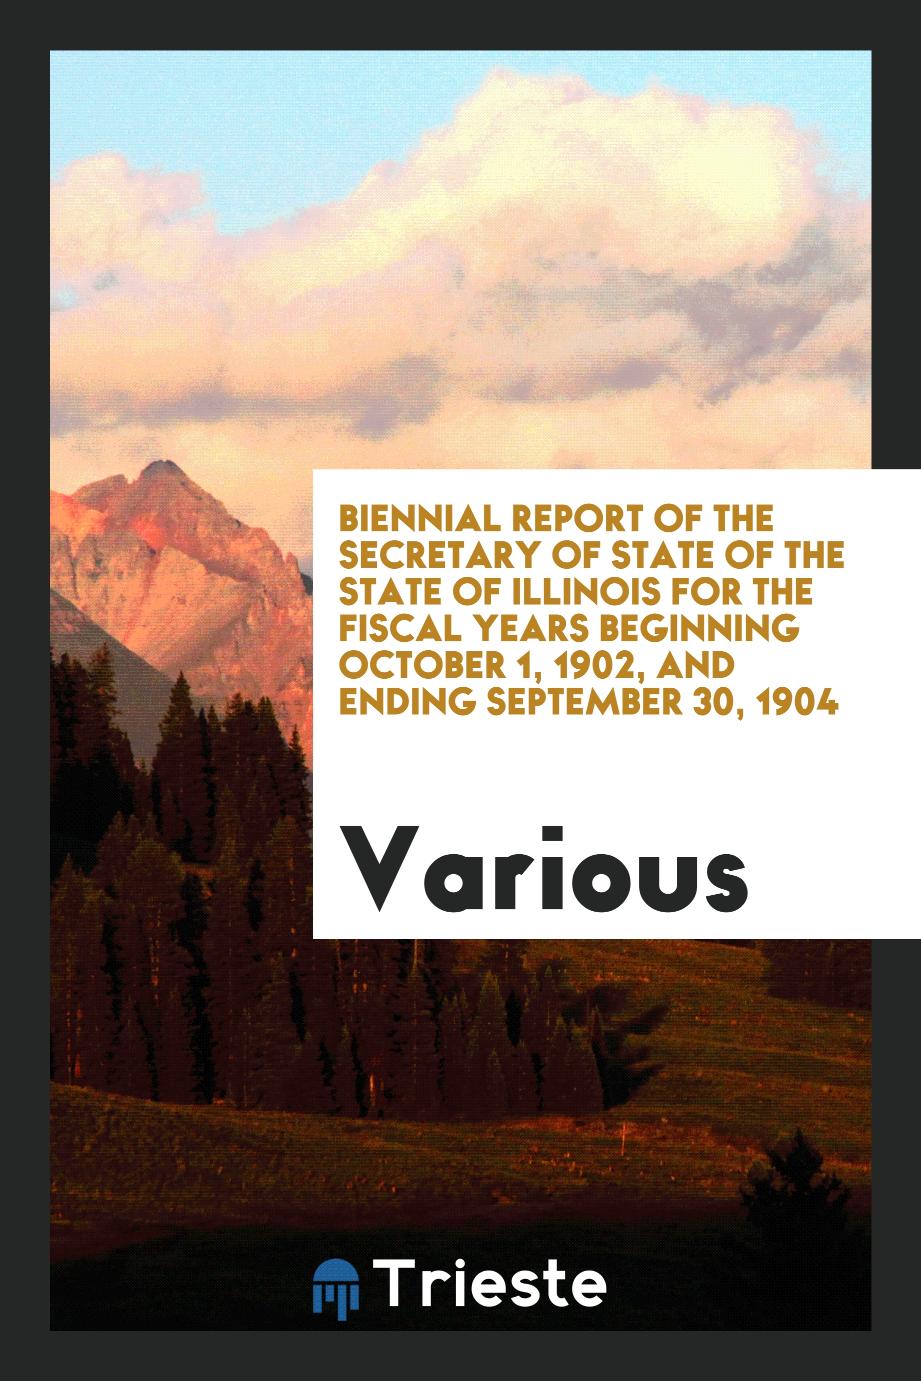 Biennial Report of the Secretary of State of the State of Illinois for the Fiscal Years Beginning October 1, 1902, and Ending September 30, 1904